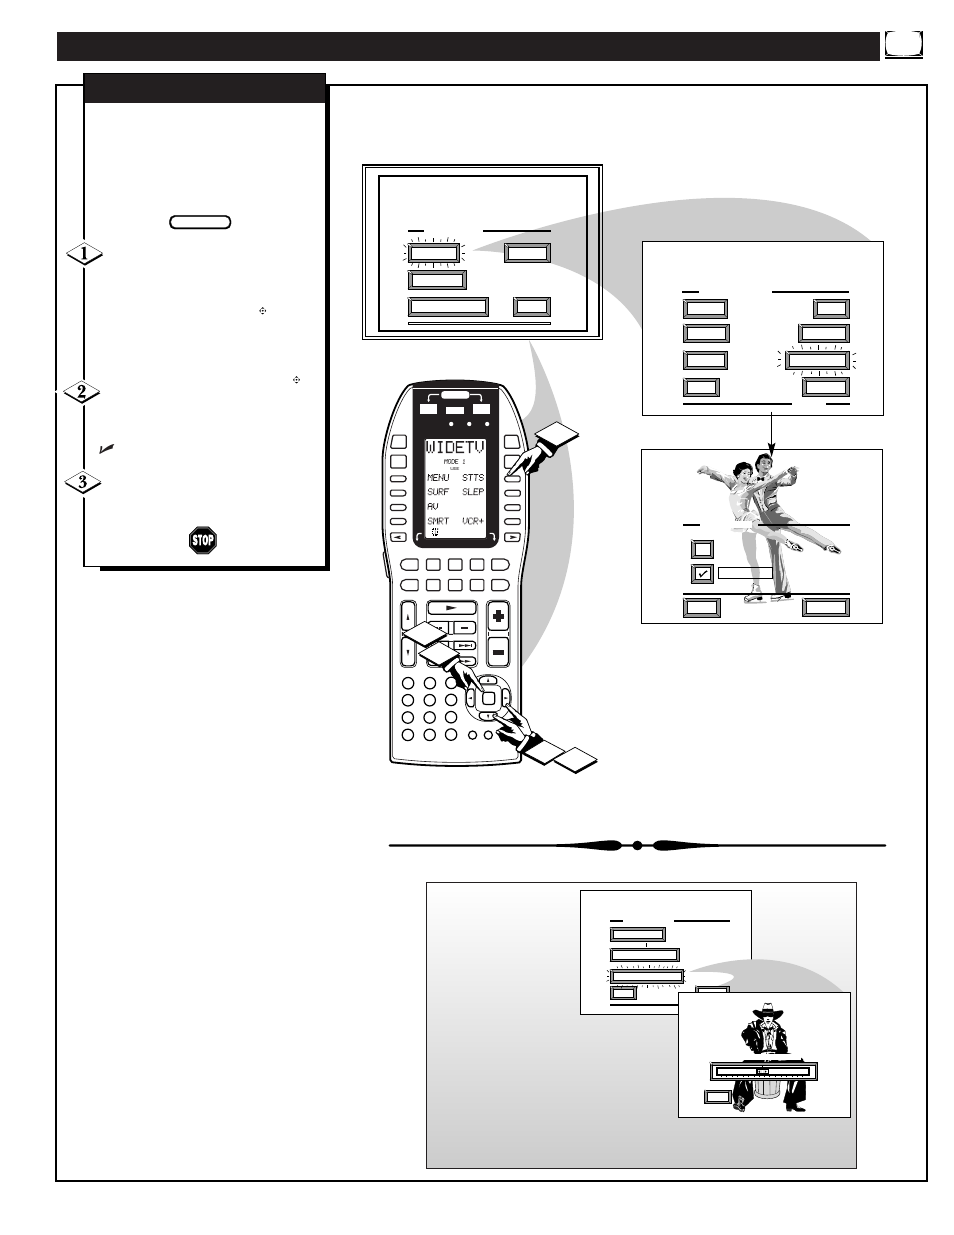 Icture, Ontrols, Continued | Clearview | Marantz PV5580 User Manual | Page 7 / 56